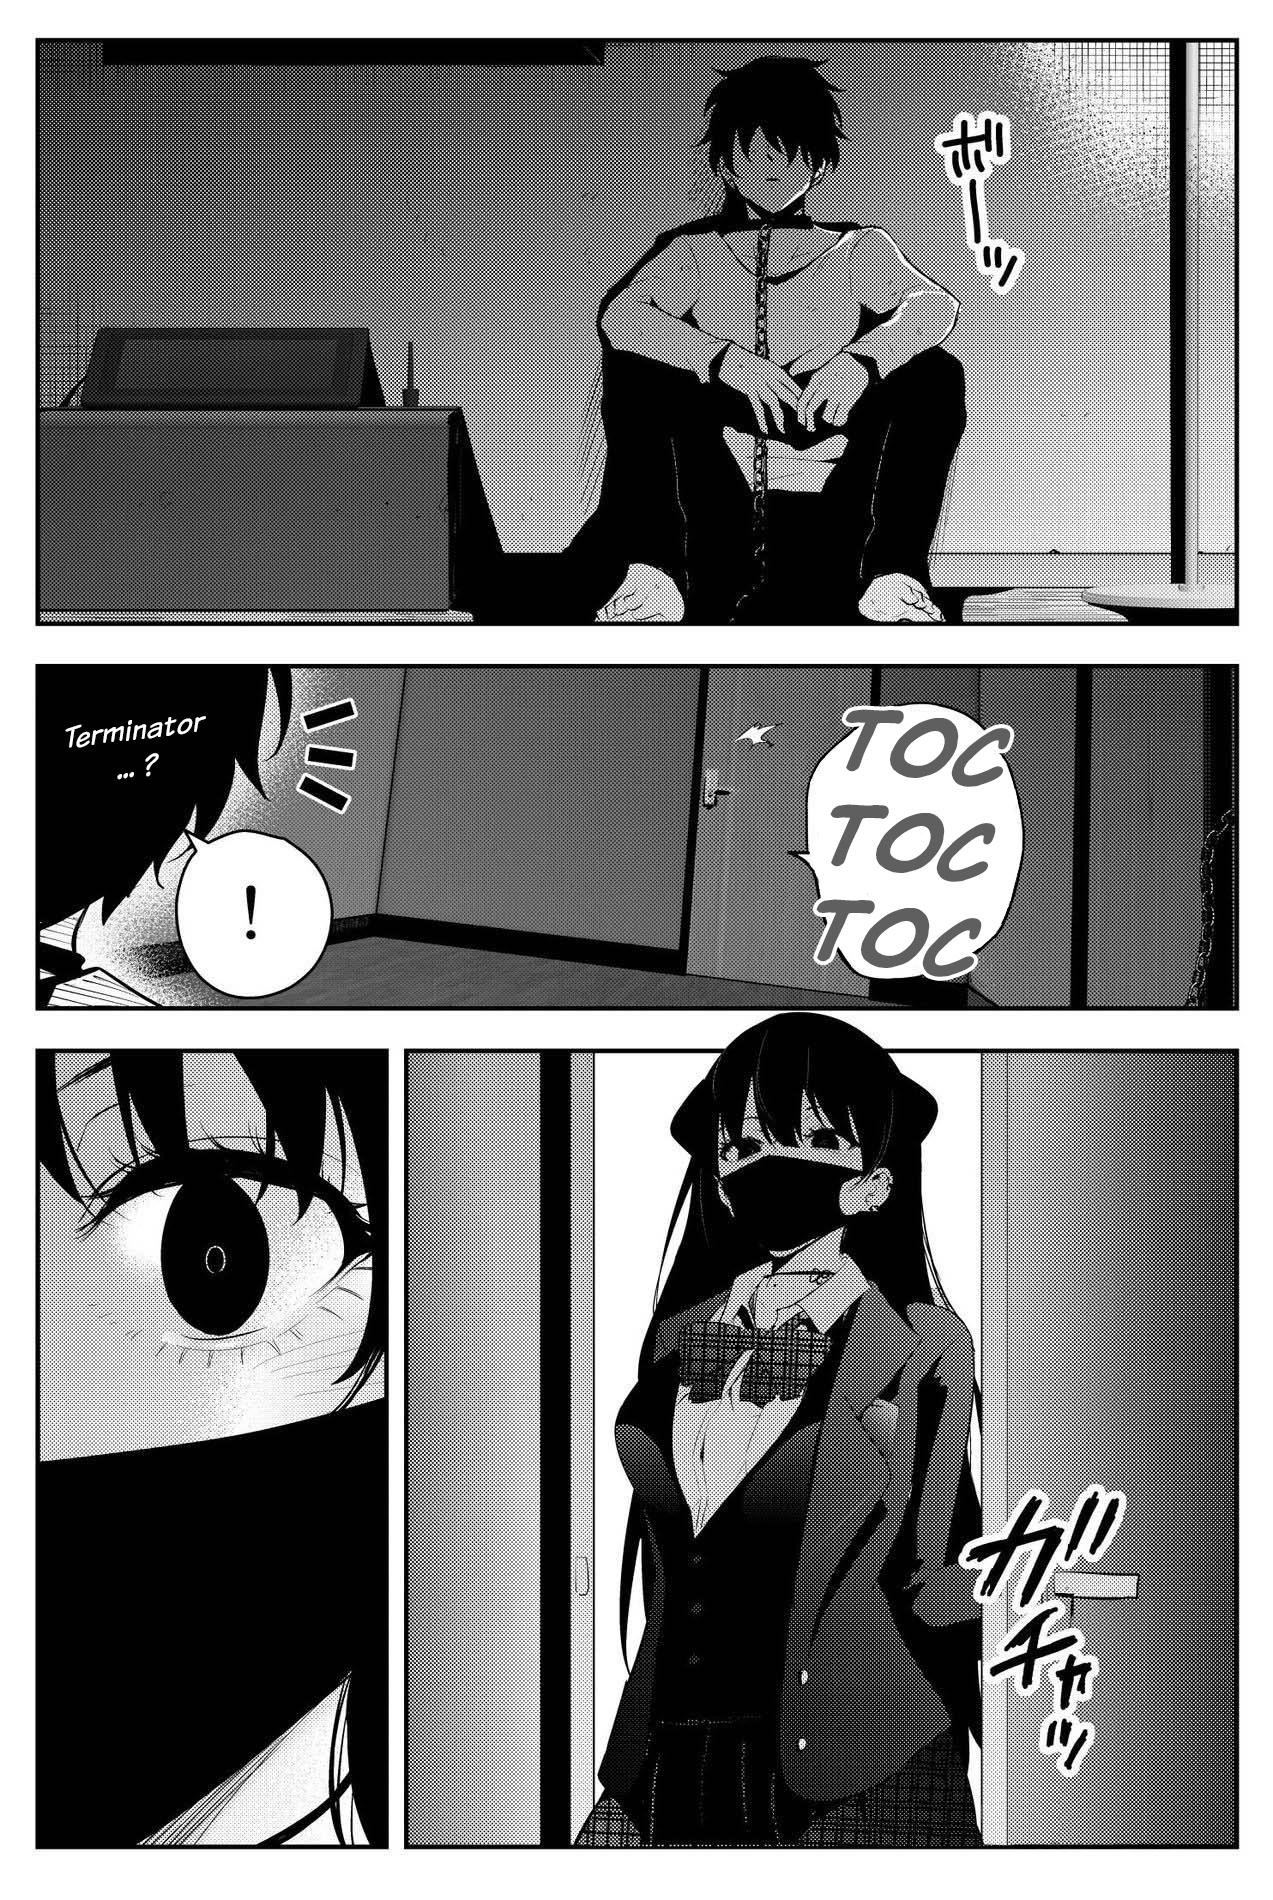 The Story Of A Manga Artist Confined By A Strange High School Girl: Chapter 3 - Page 1